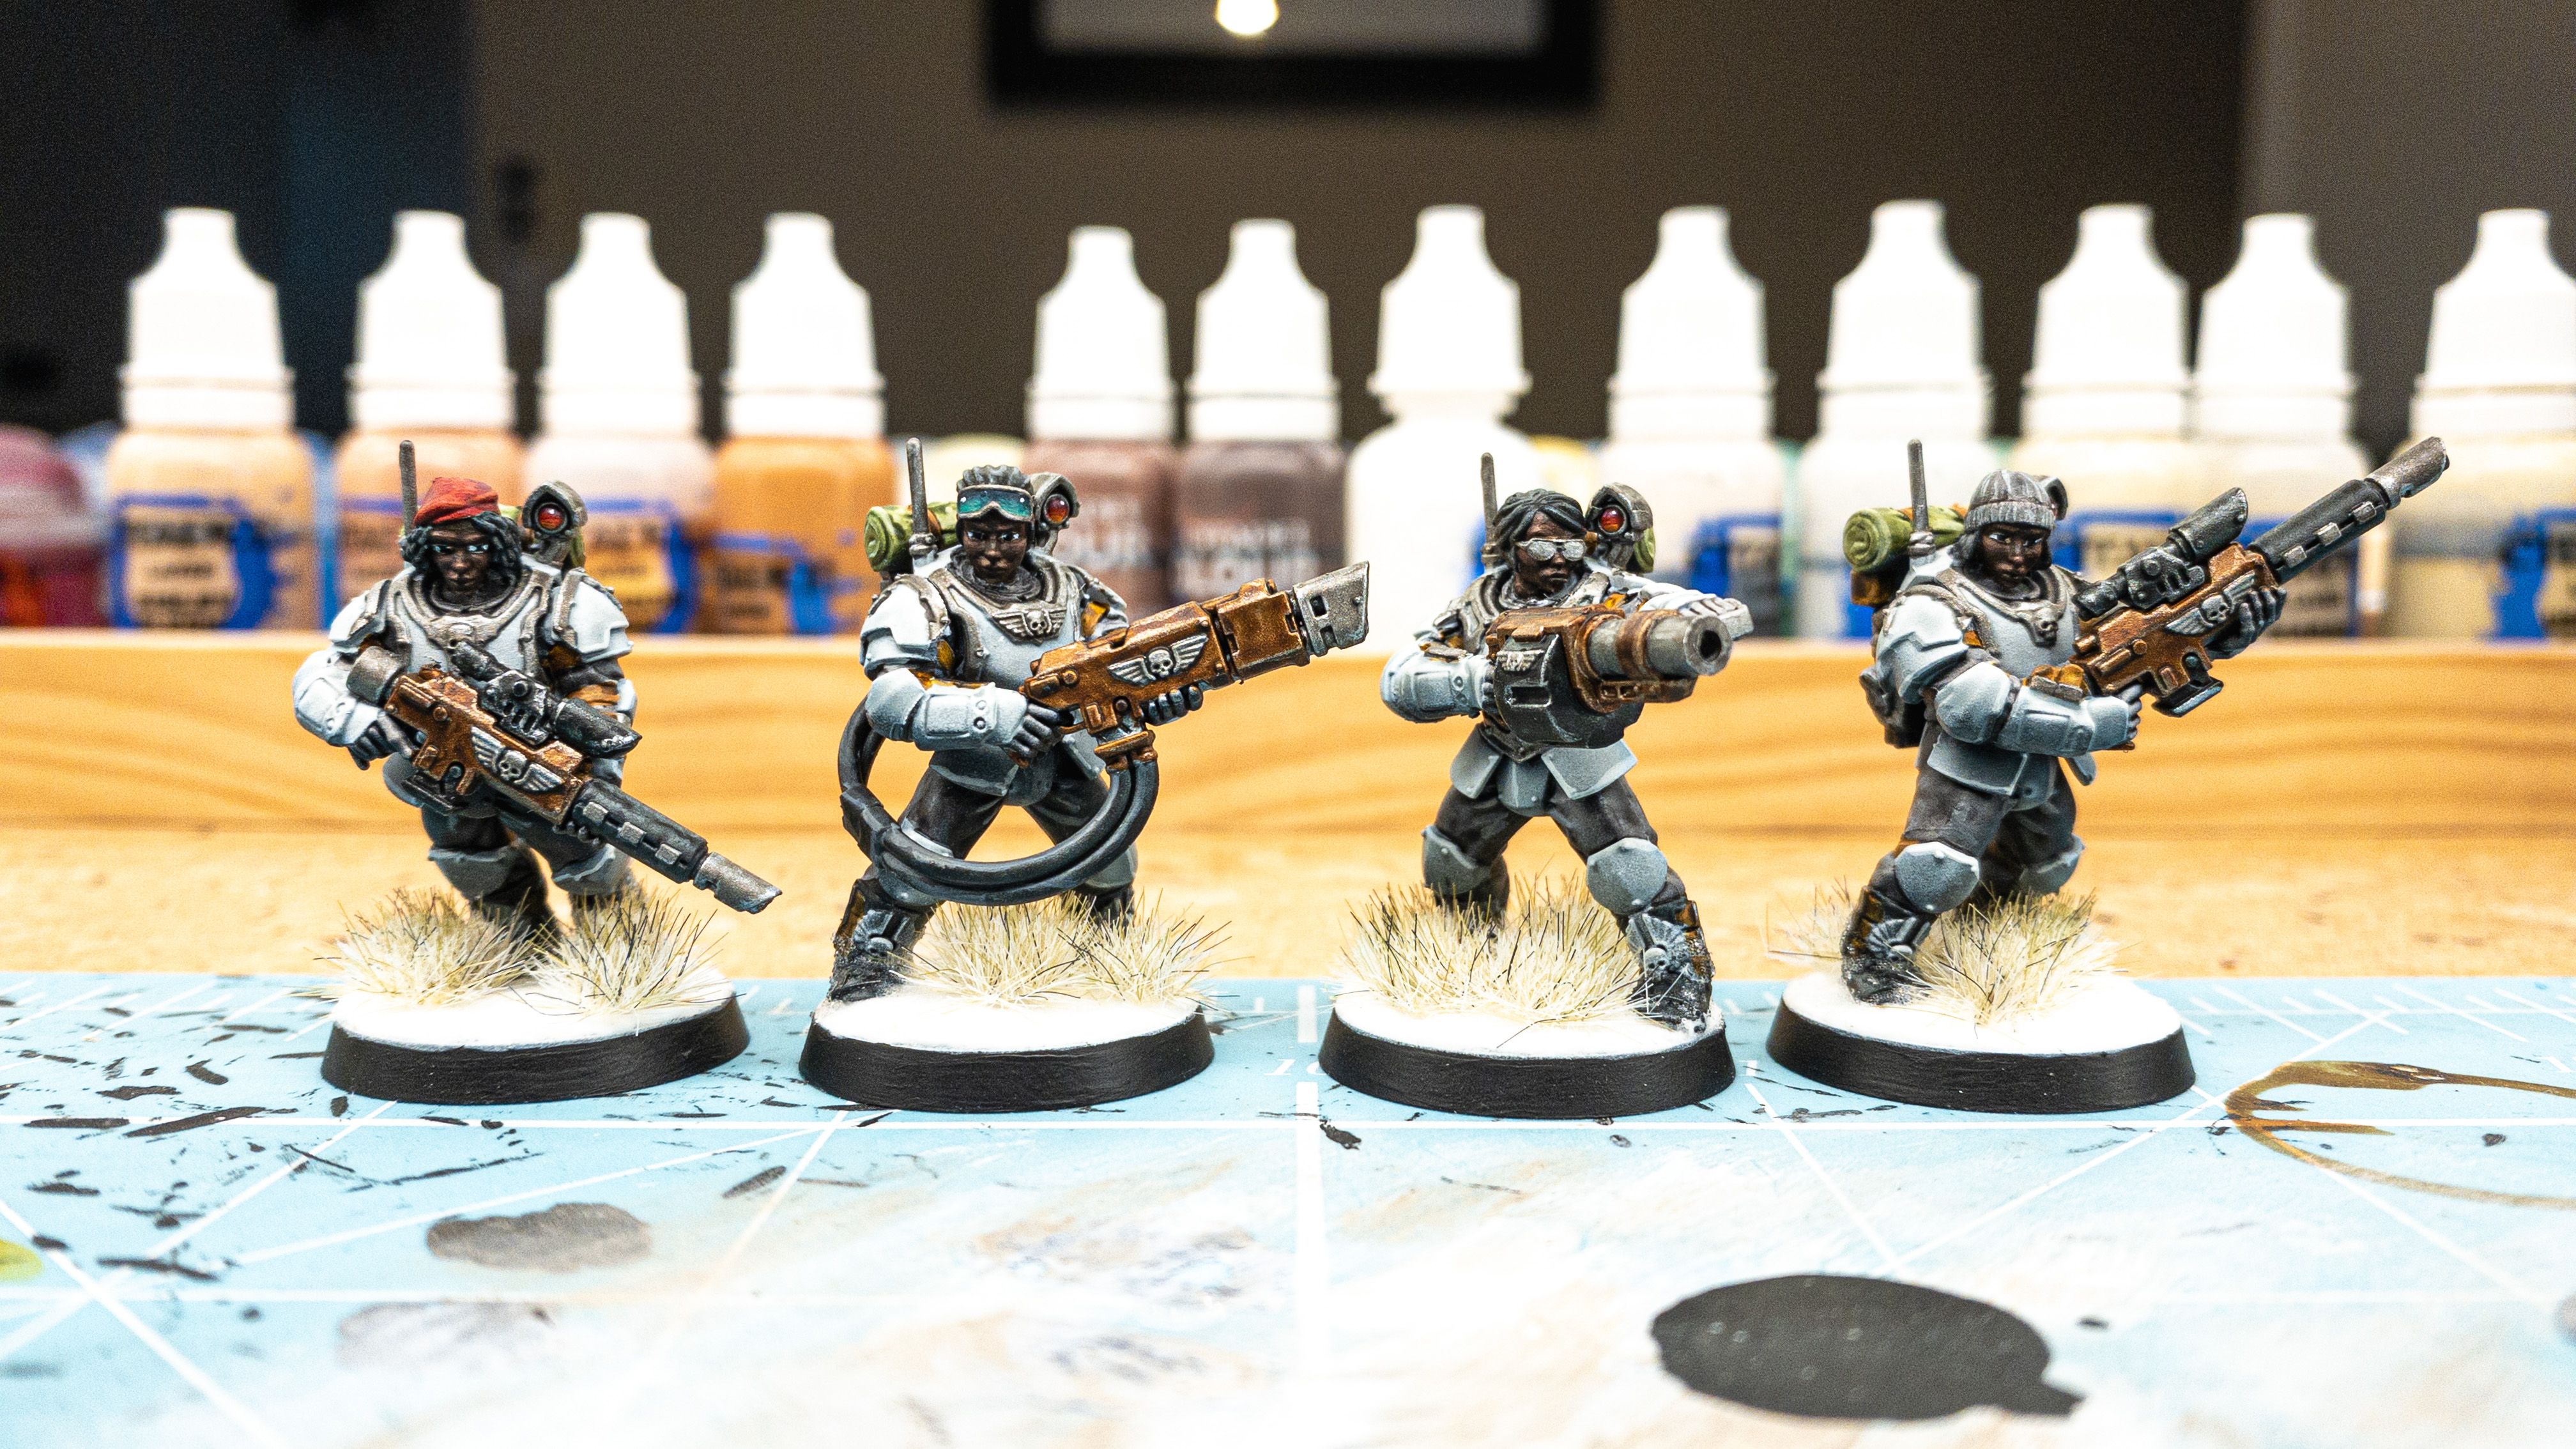 A photo of four Warhammer 40,000 miniatures. They're all regular human troops with big armour and various guns, but the stock male heads have been replaced with third-party female ones from a company called Statuesque Miniatures. The skin colour is very dark but with really nice subtle shading, and the one I called out with the goggles has them pulled up on her forehead. The goggles have a really nice shade going from very dark green down to a lighter green so it looks like they're some sort of futuristic night vision or something.